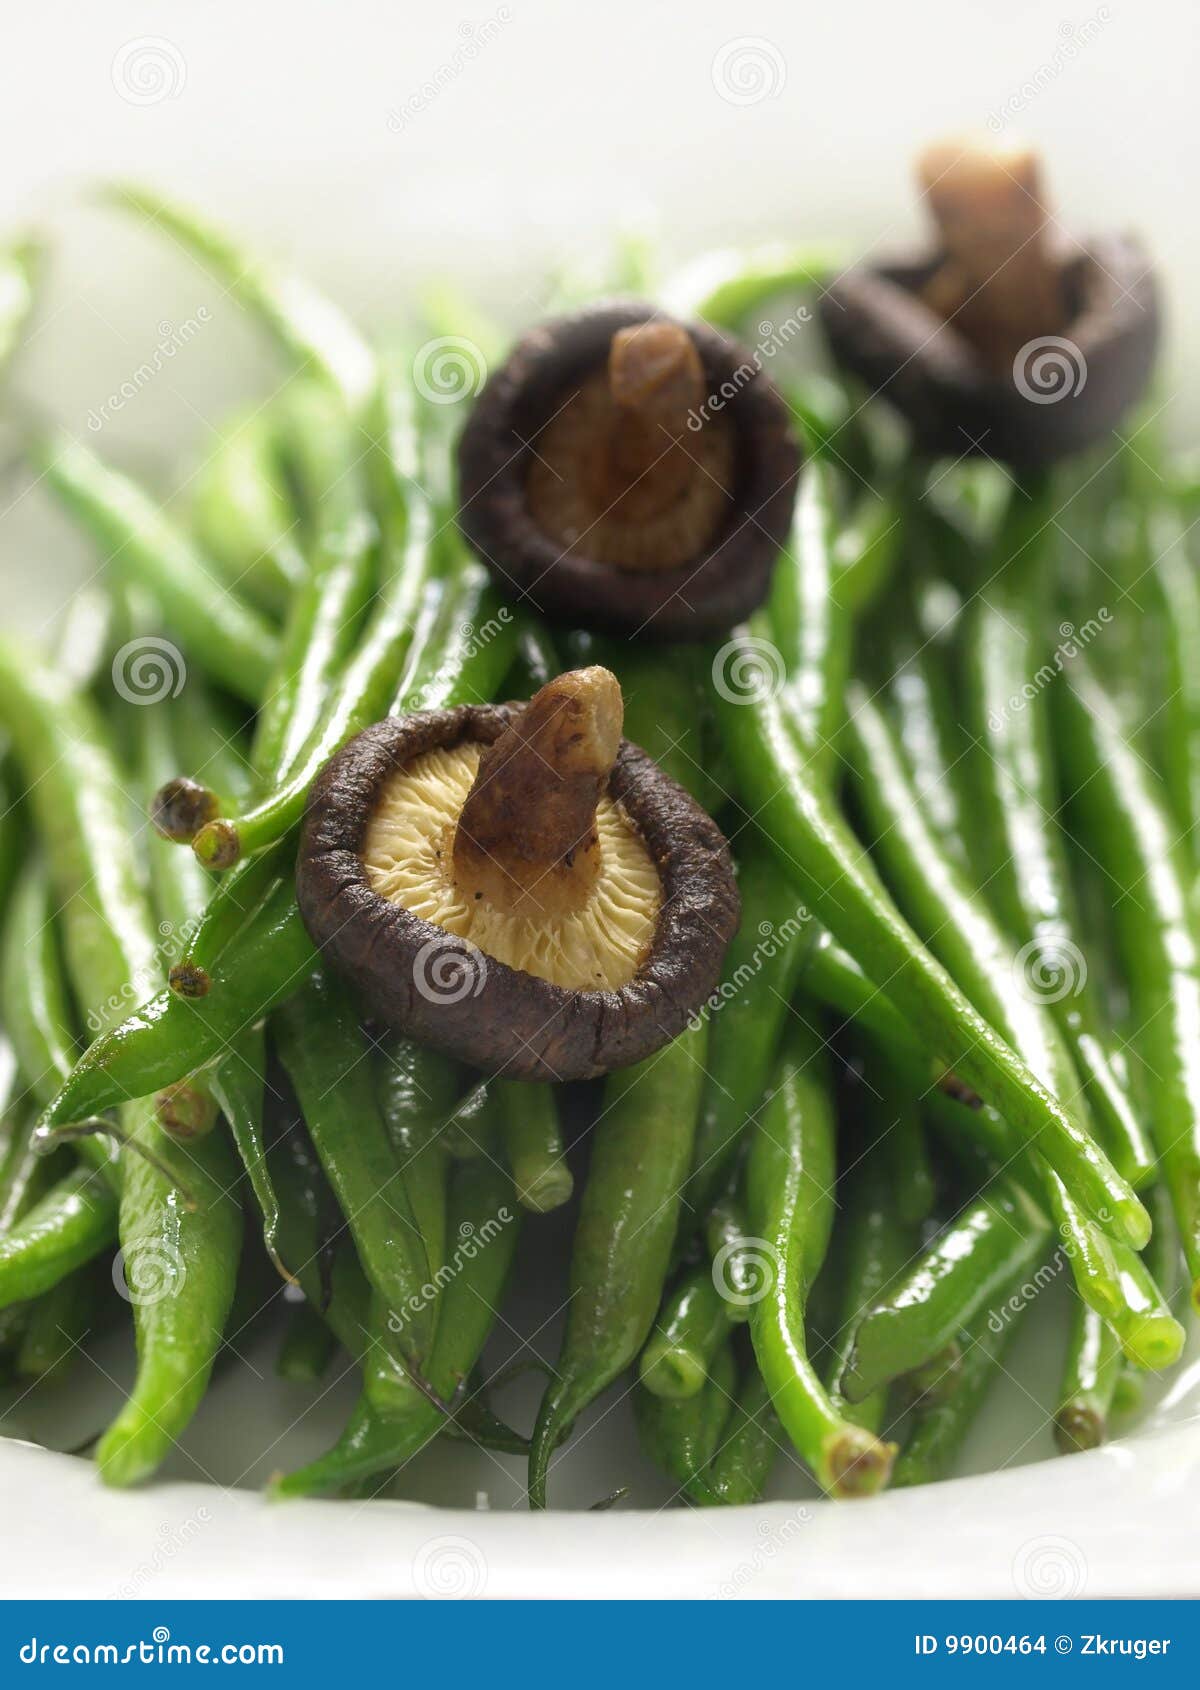 kenyan extra fine beans with mushrooms